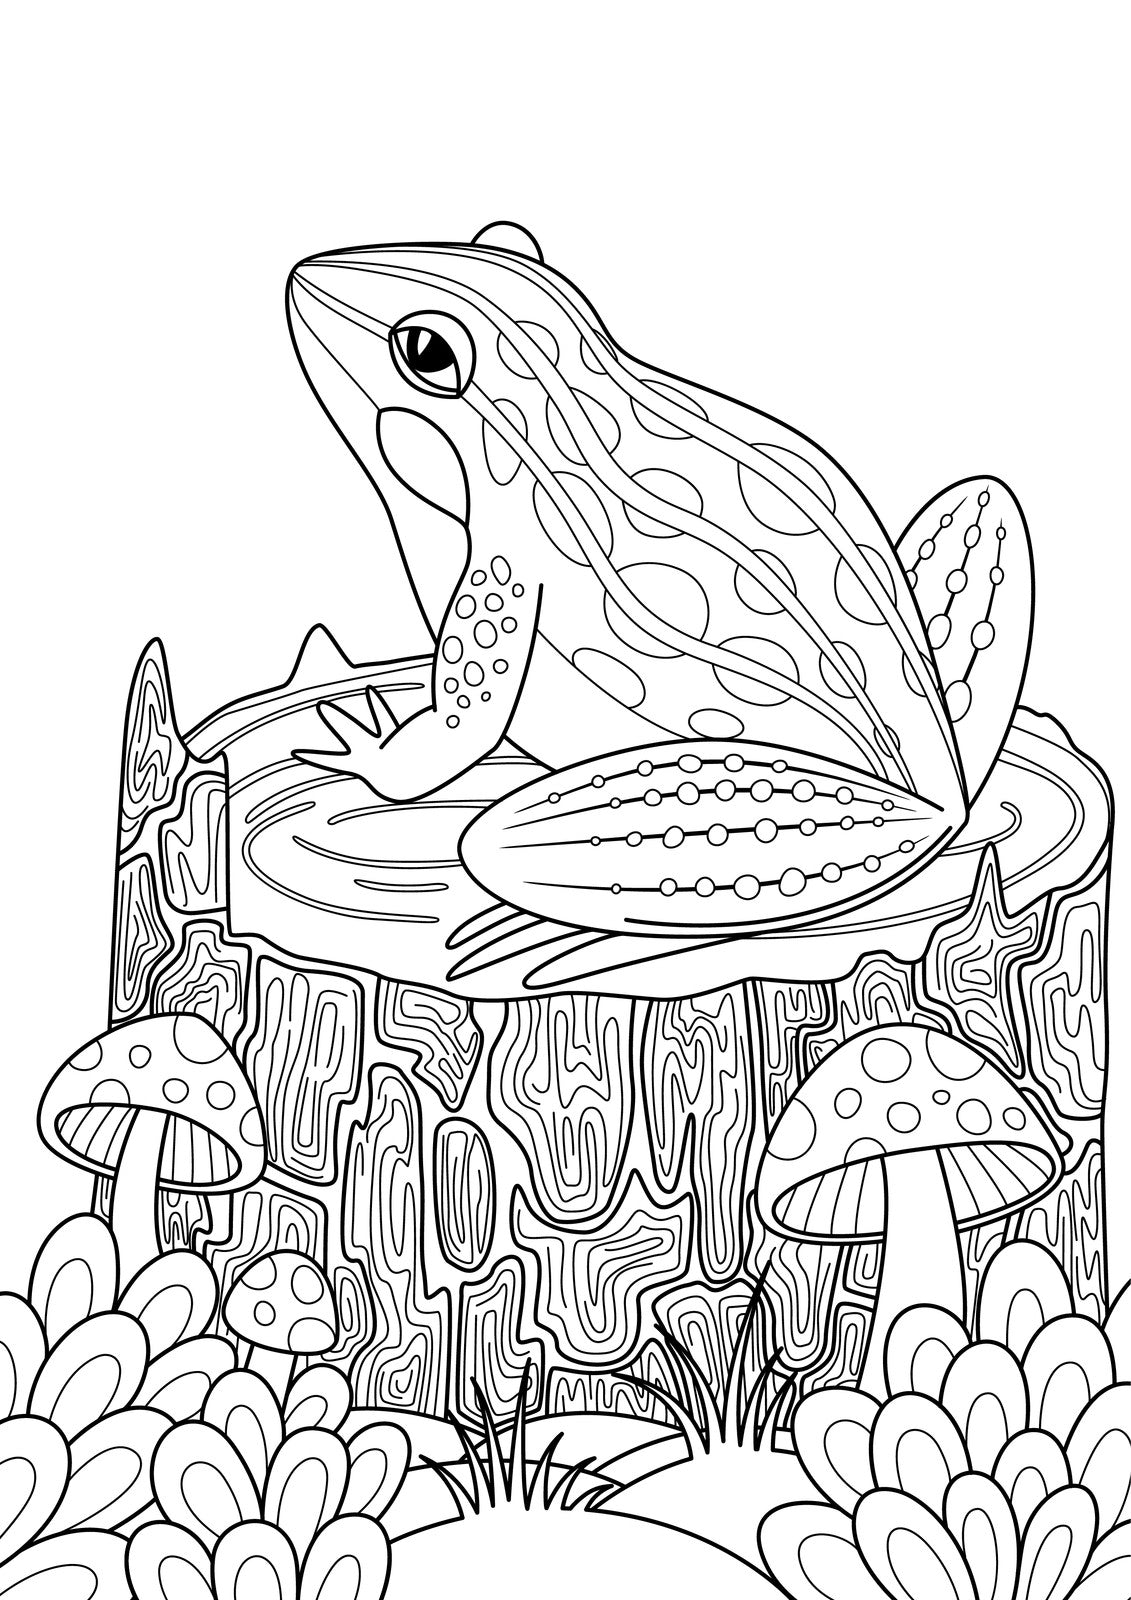 Frogs - Delightful & Decorative Frogs & Toads, PDF Coloring Book